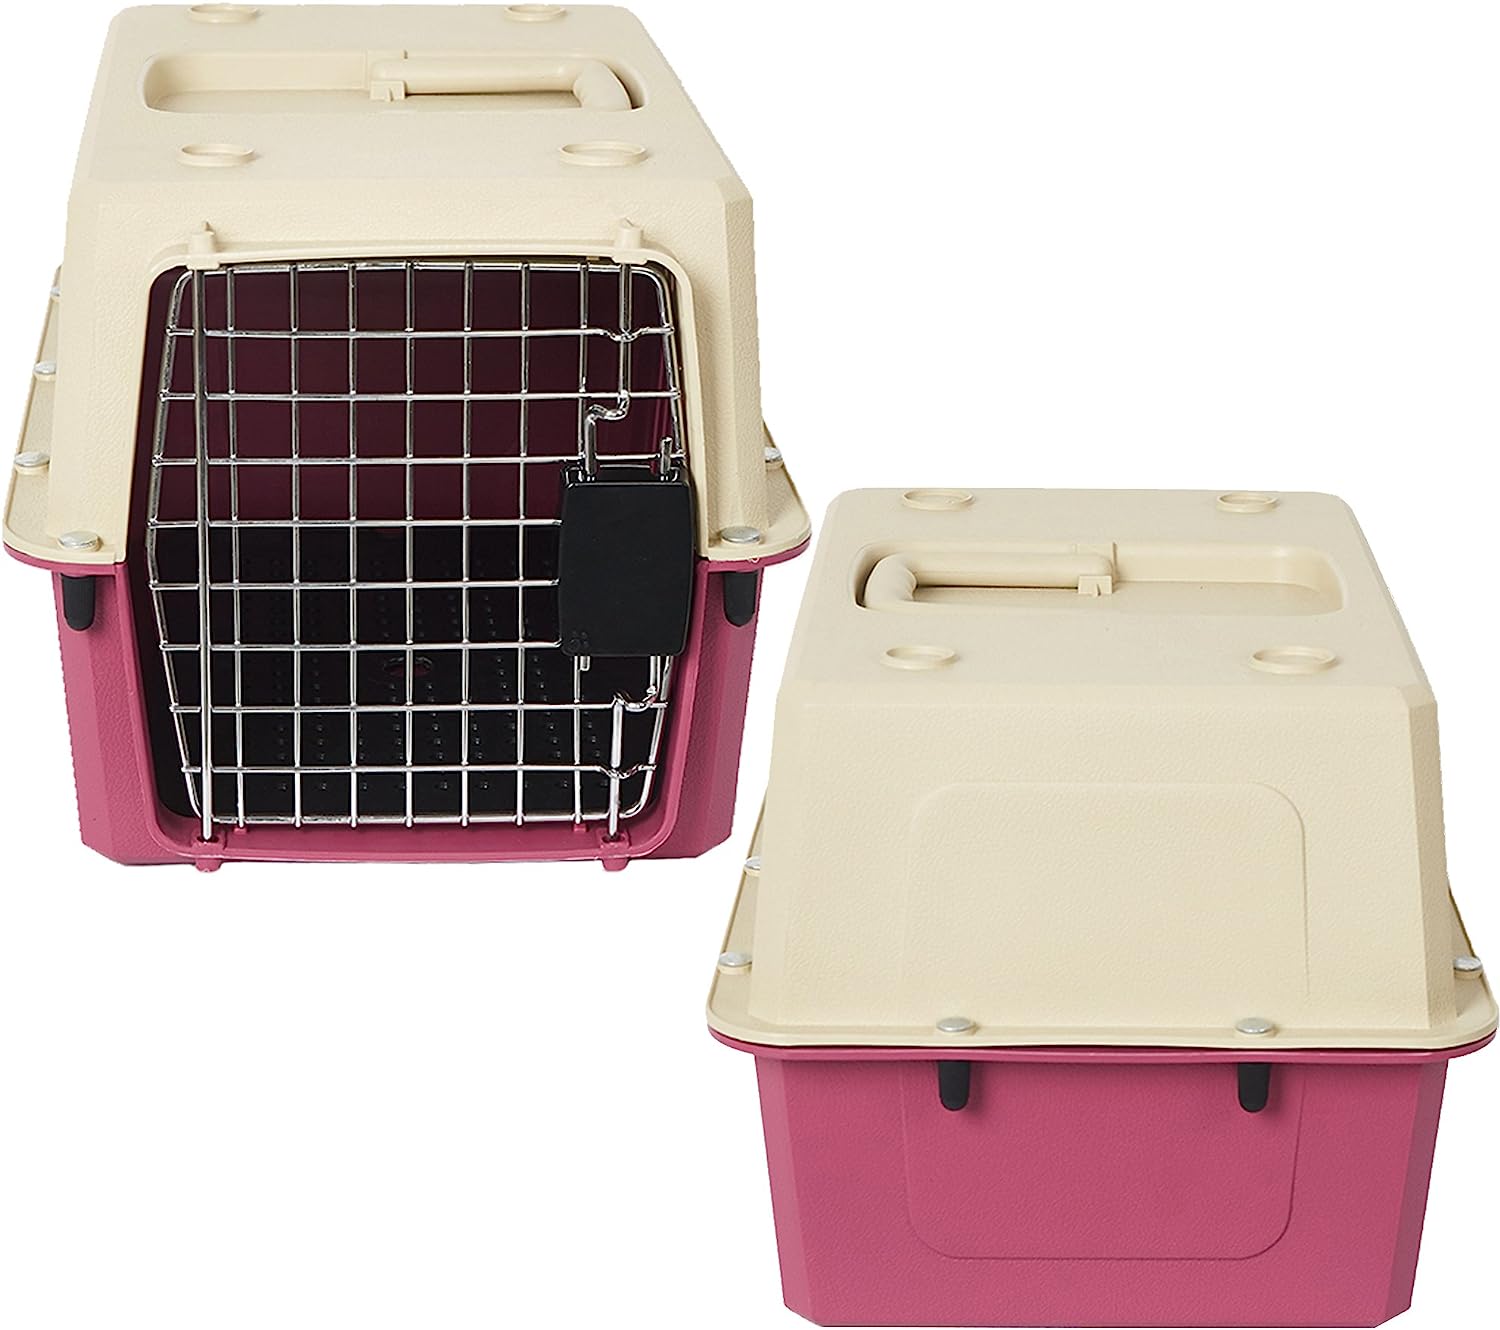 Luckyermore Large Portable Pet Carriers Kennel Crate Airline Approved Kitty Travel Cage for Puppy Bunny Cats, Red